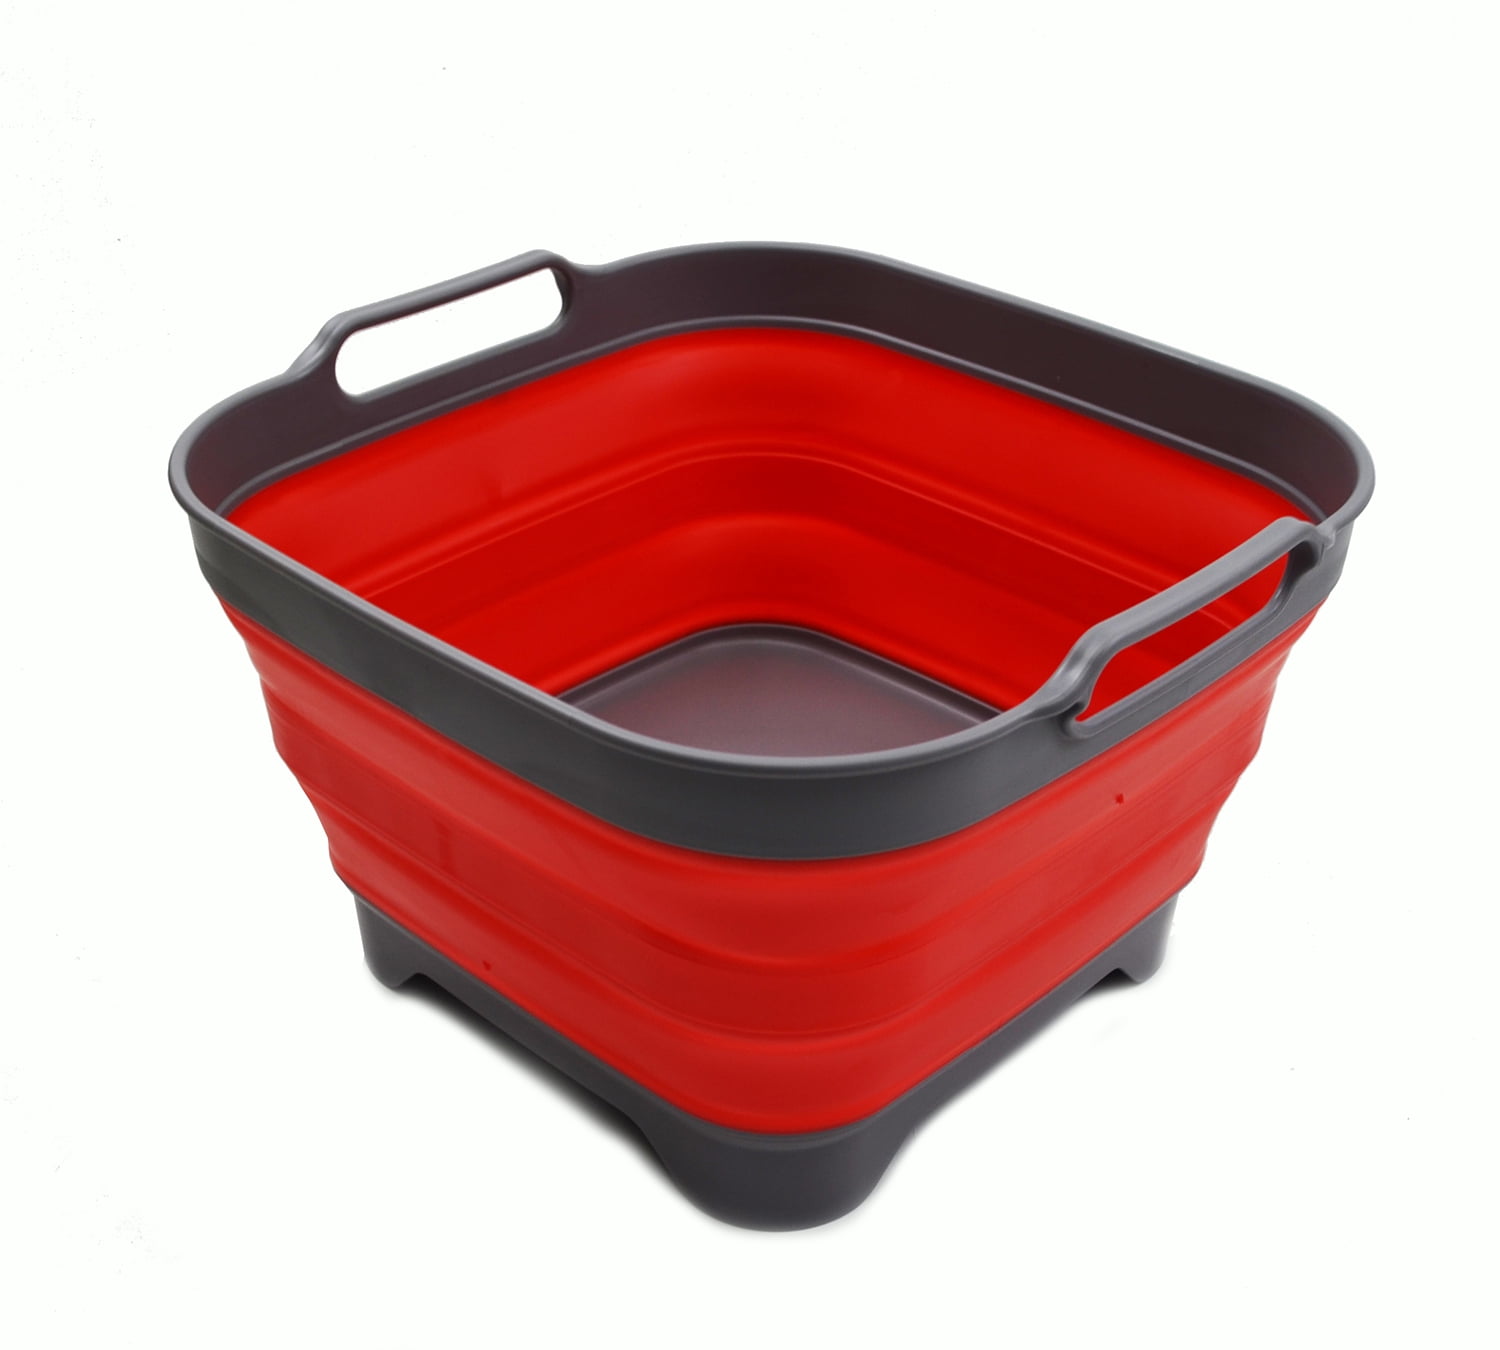 Washing Up Bowl With Built-In Plug & Draining Holes Foldable Portable Basin Red 